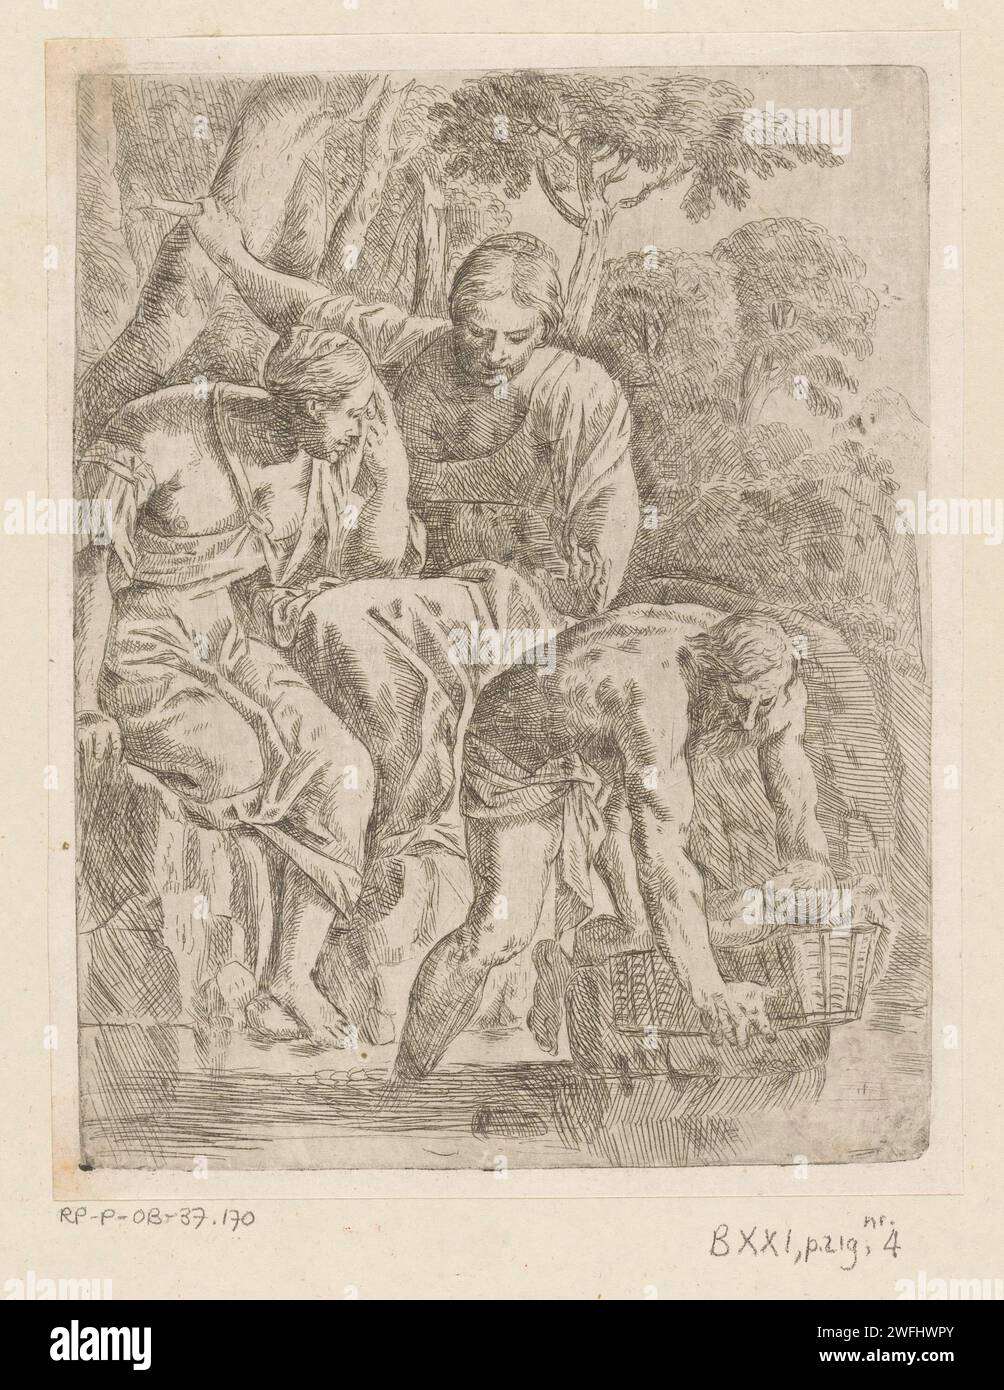 Moses is laid to find, Marco San Martino, 1625 - 1680 print A man leaves the piping basket with the young Moses in the water. Behind him are the mother of Moses and his sister Mirjam on the waterfront. Italy paper etching . Nile Stock Photo